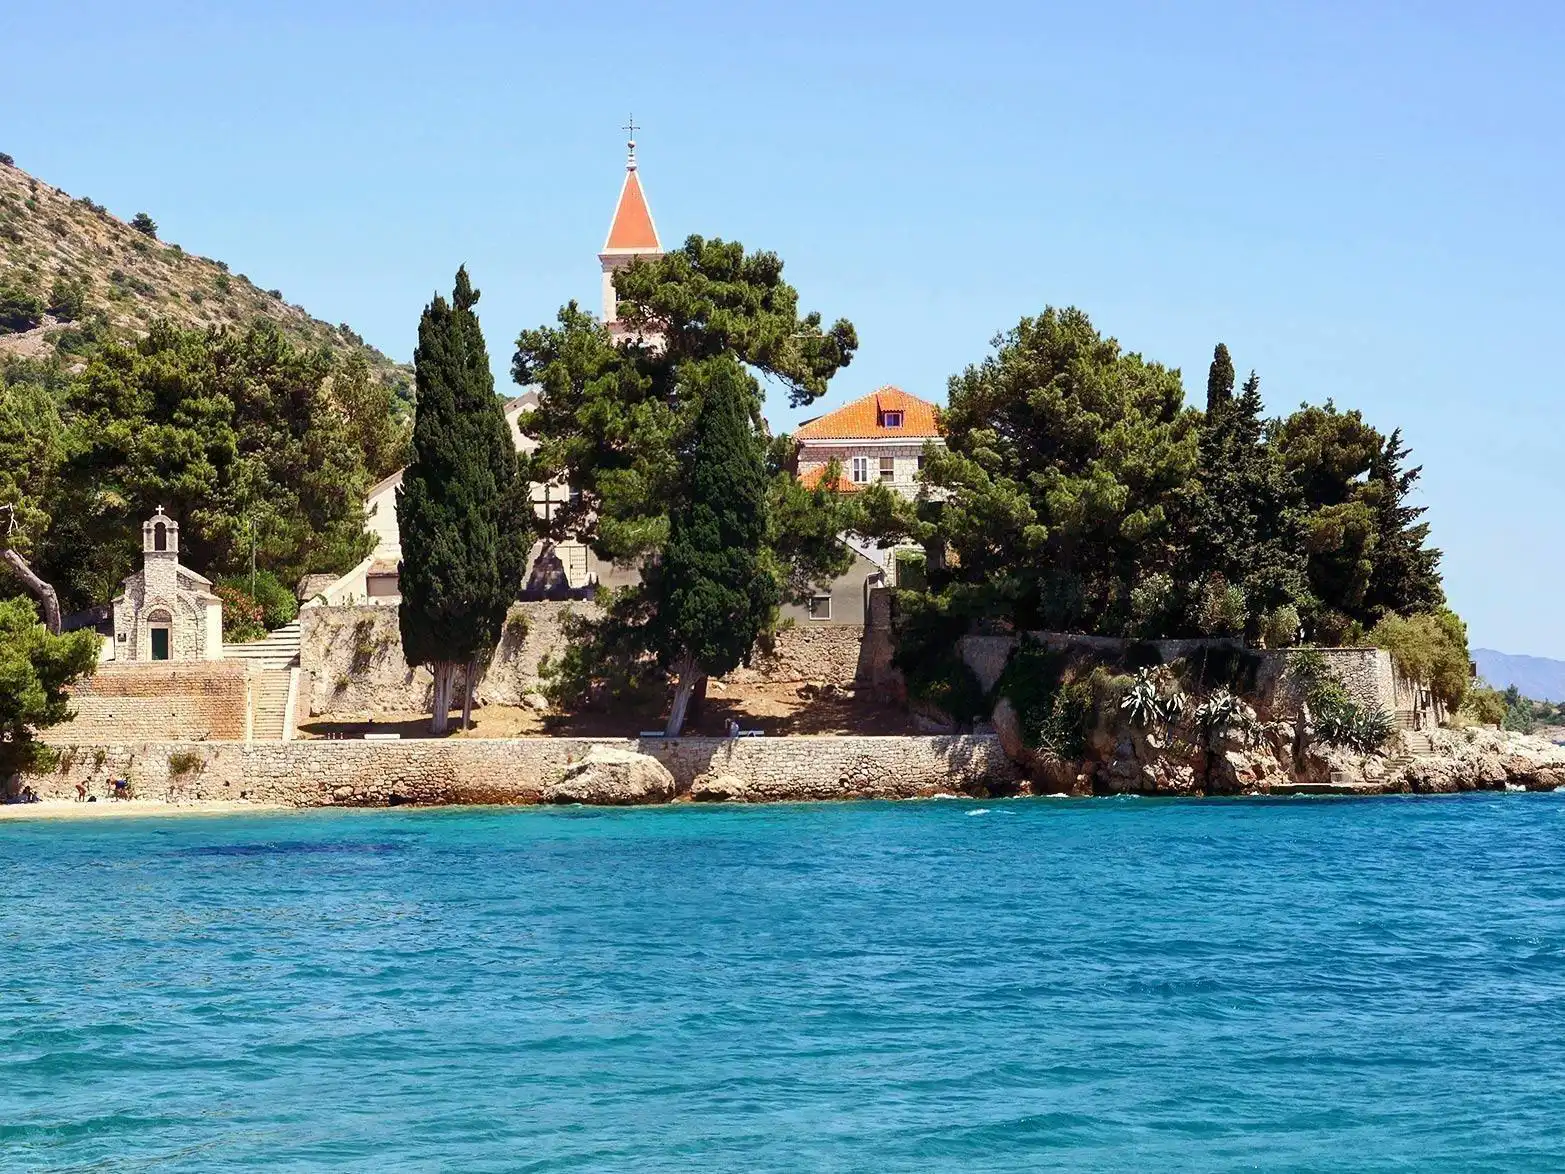 The beautiful island of Brač and town of Bol by Blue Shark tour